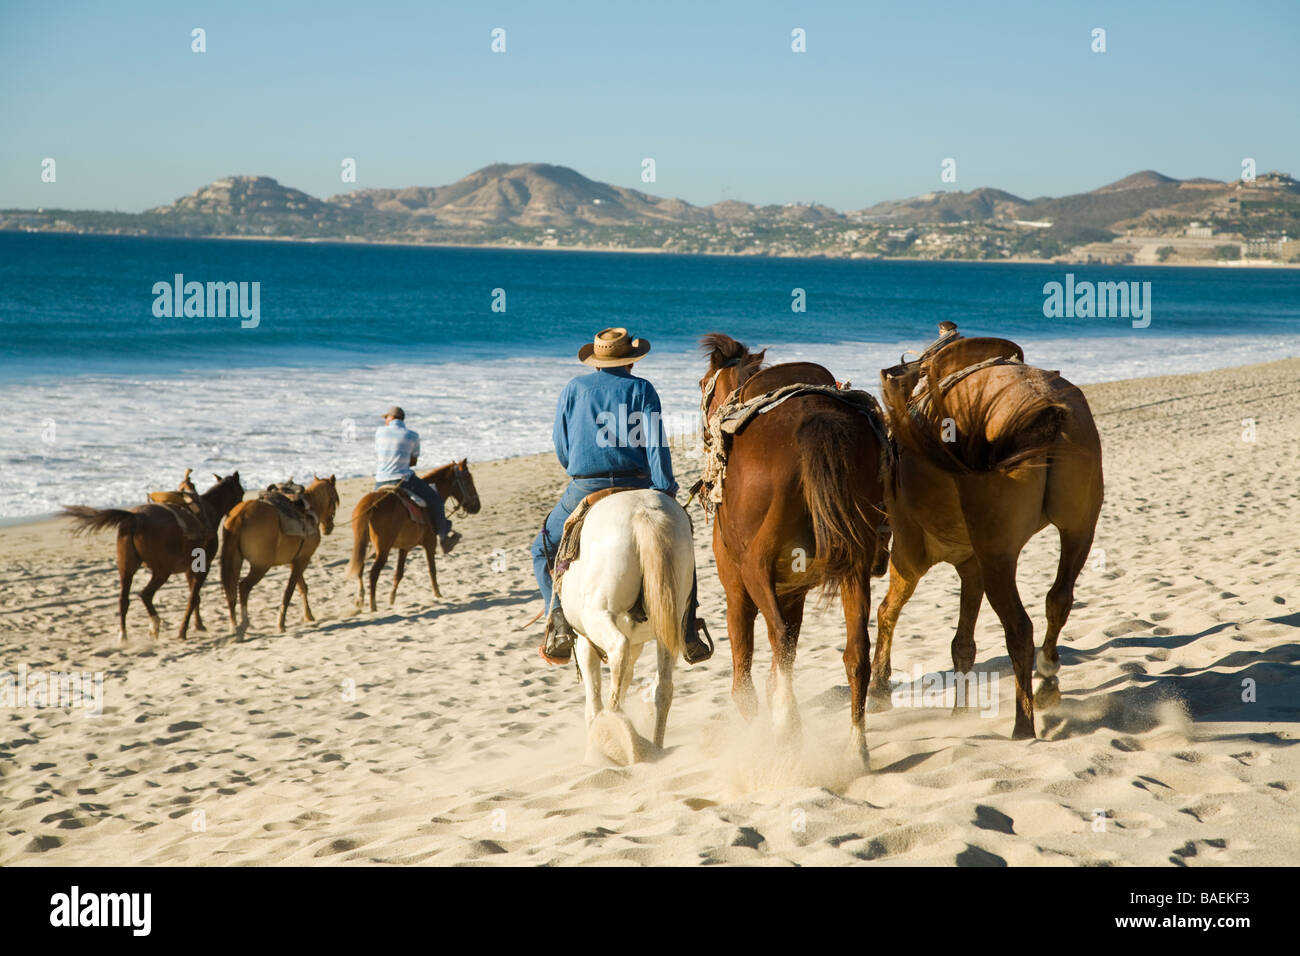 MEXICO San Jose del Cabo Mexican men on horseback wearing cowboy hat  and holding reins to horses walking beach near resorts Stock Photo